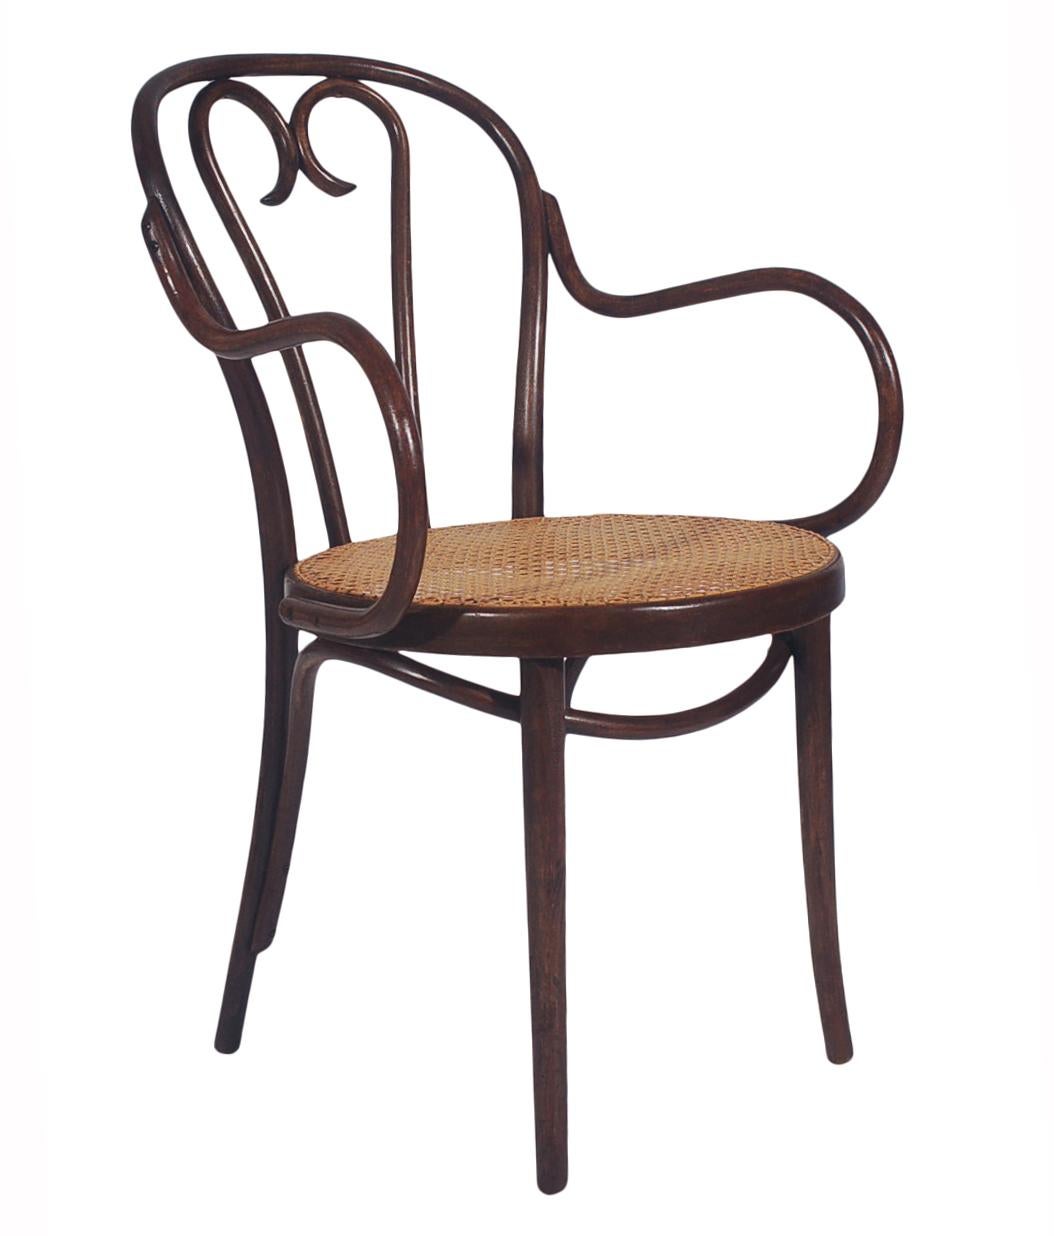 Mid-20th Century Vintage Set of Eight Bentwood and Cane Seat Armchair Dining Chairs by Thonet